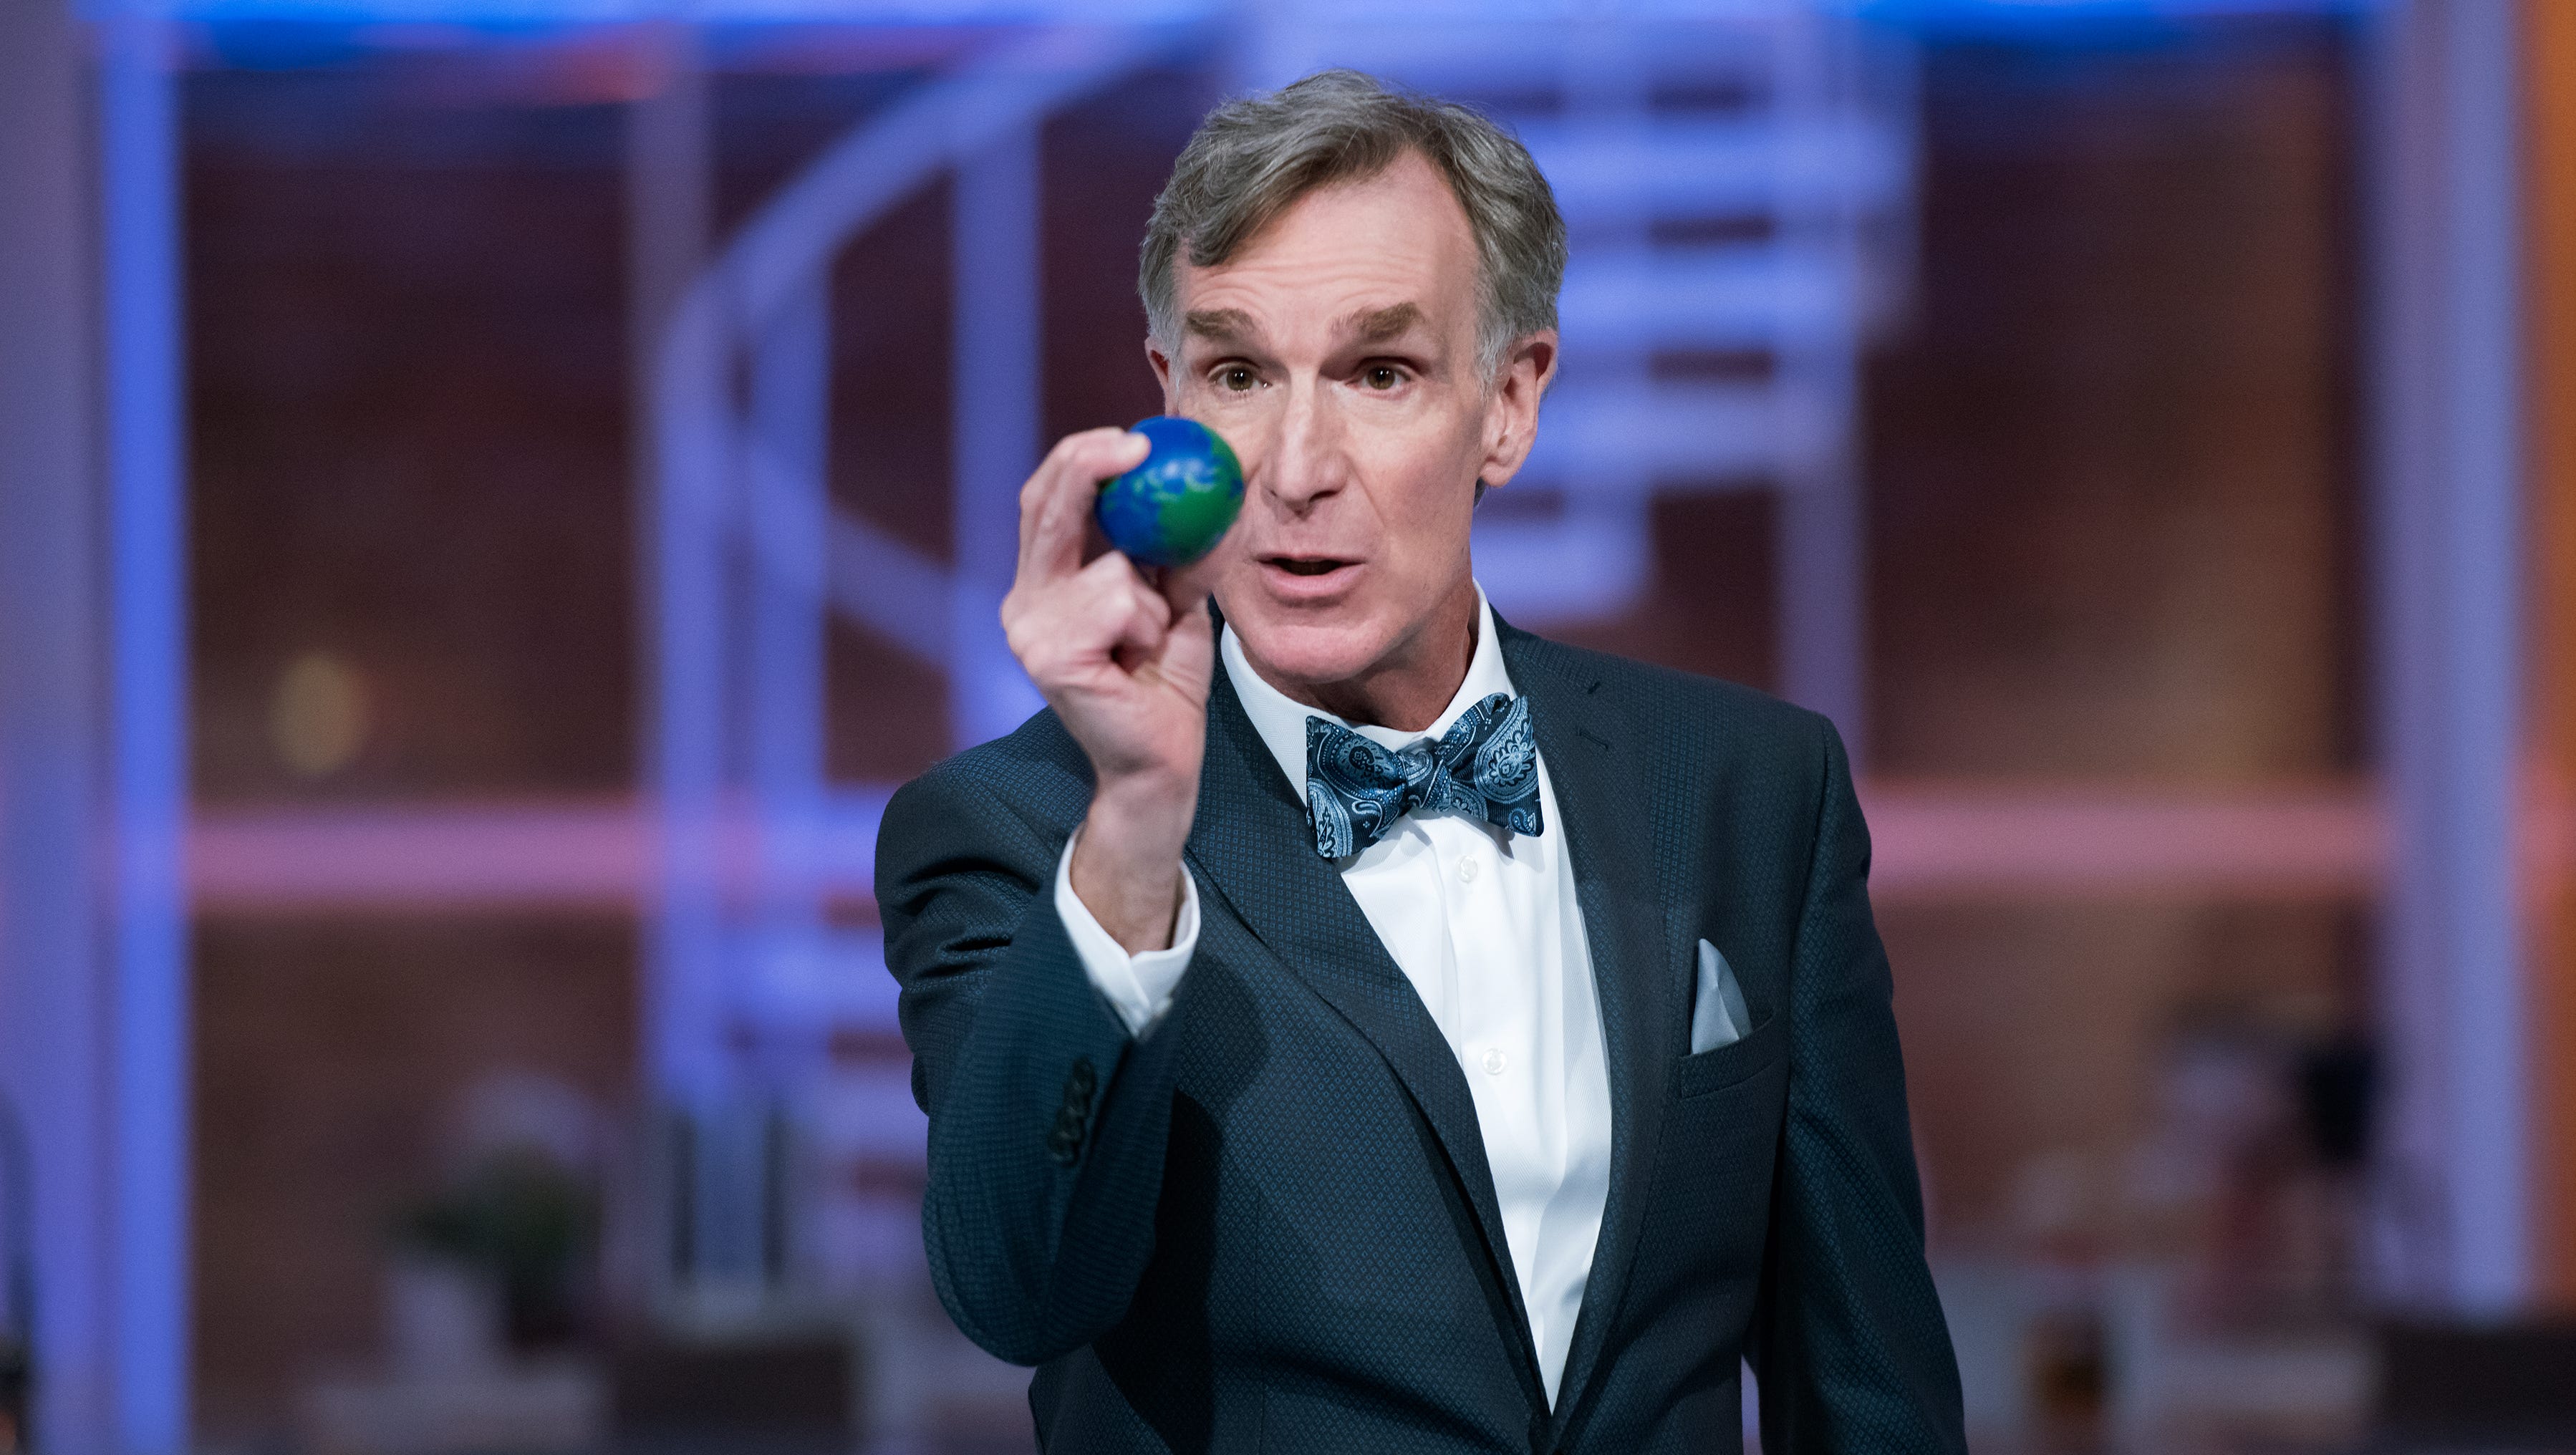 Bill Nye, the Science Guy, is back to save the world (from science deniers)